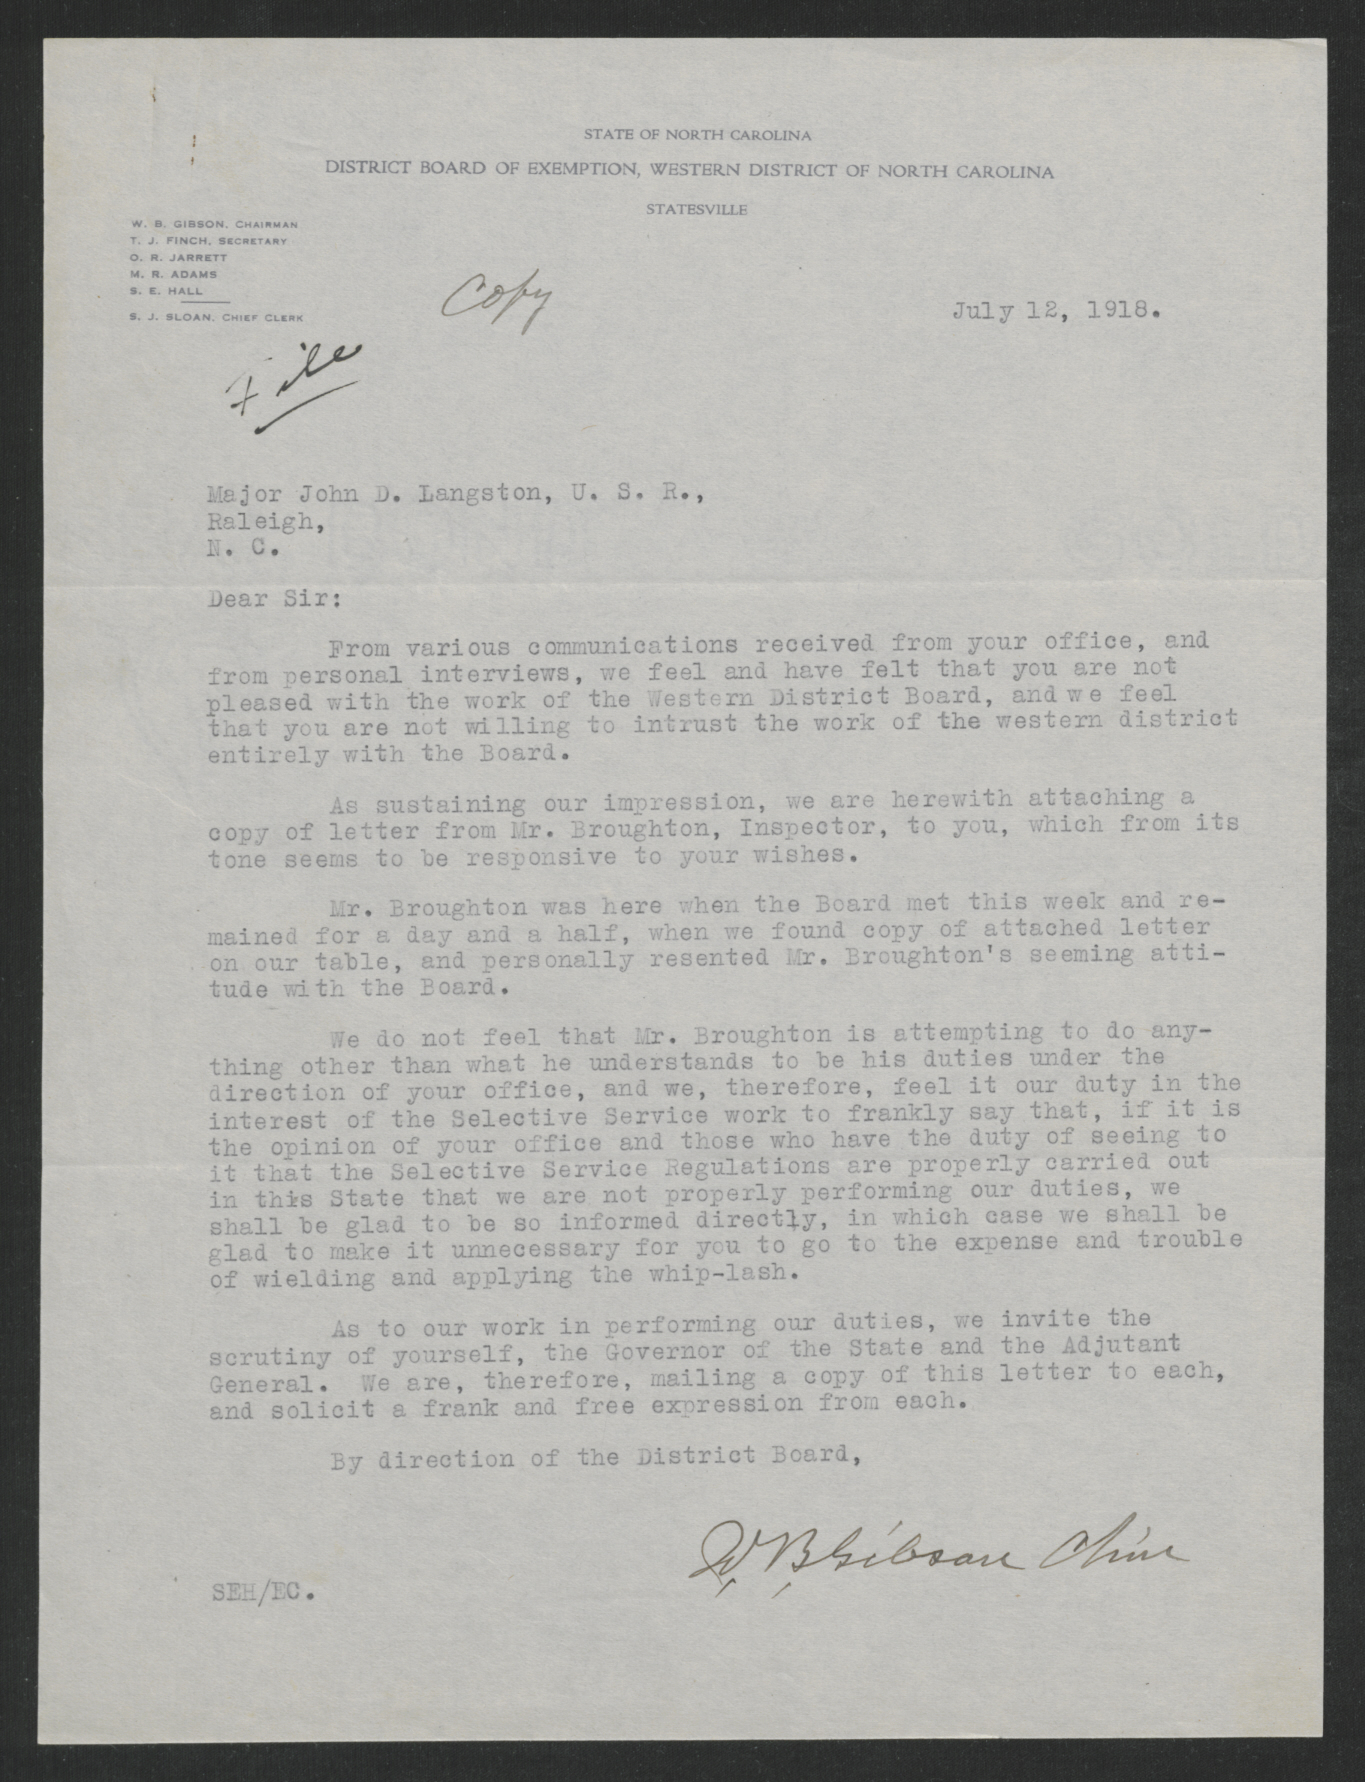 Letter from William B. Gibson to John D. Langston, July 12, 1918